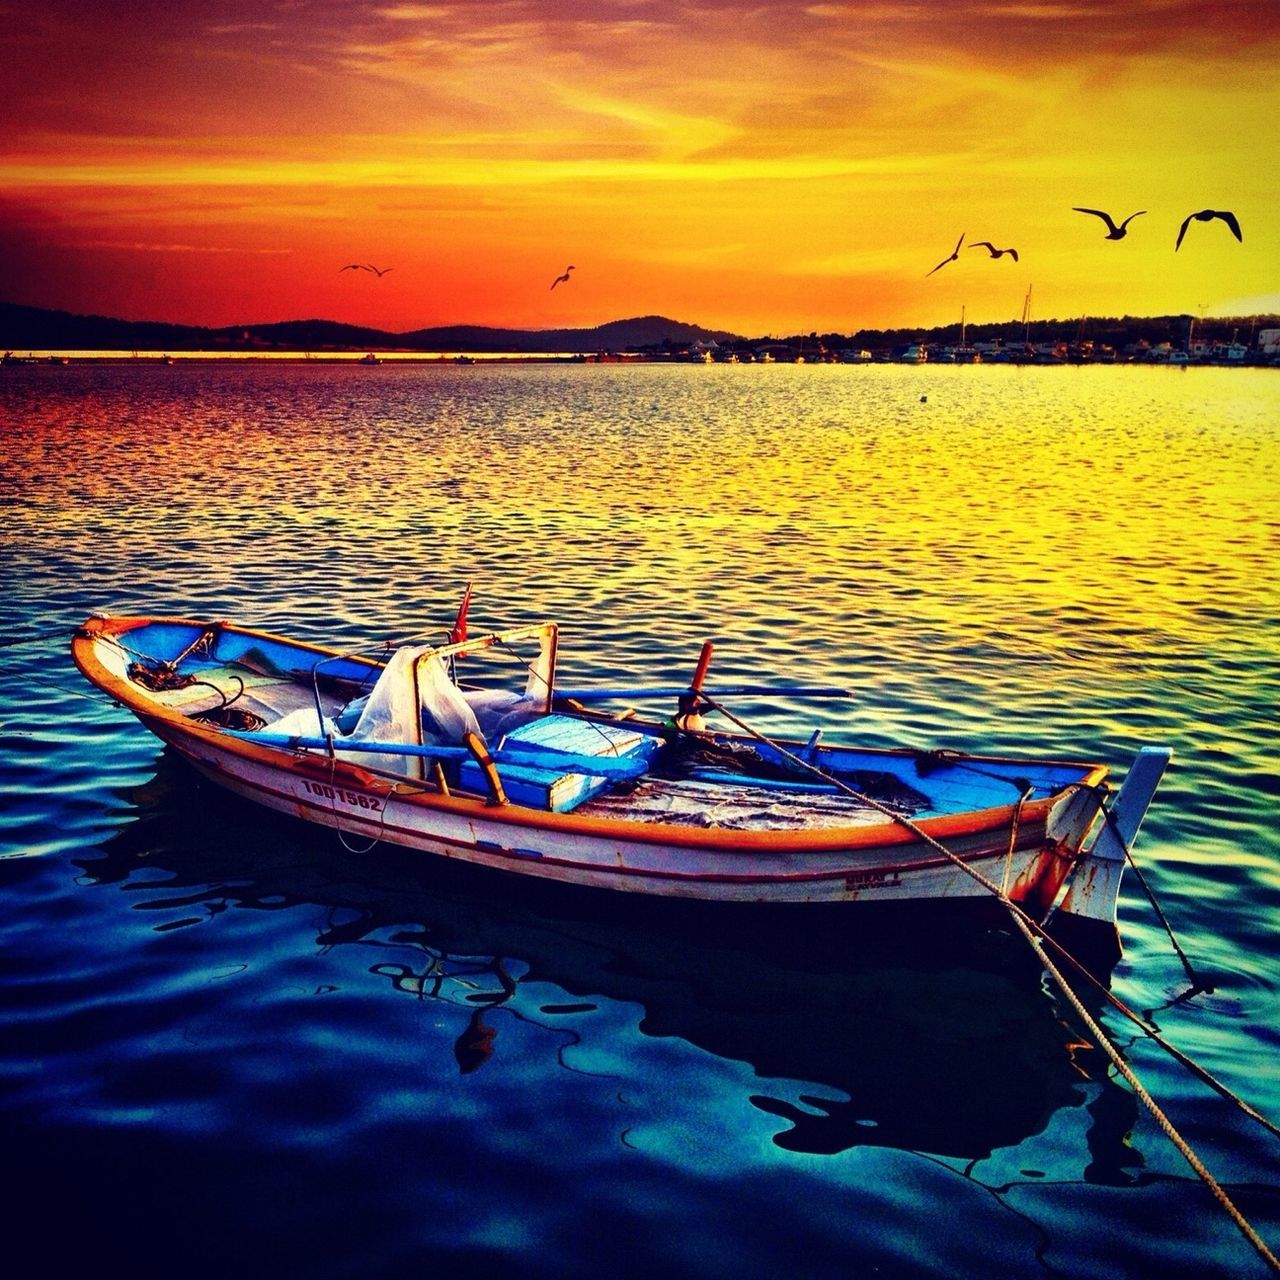 nautical vessel, boat, transportation, water, moored, mode of transport, sunset, reflection, tranquil scene, tranquility, sky, waterfront, scenics, lake, nature, travel, sea, beauty in nature, idyllic, dusk